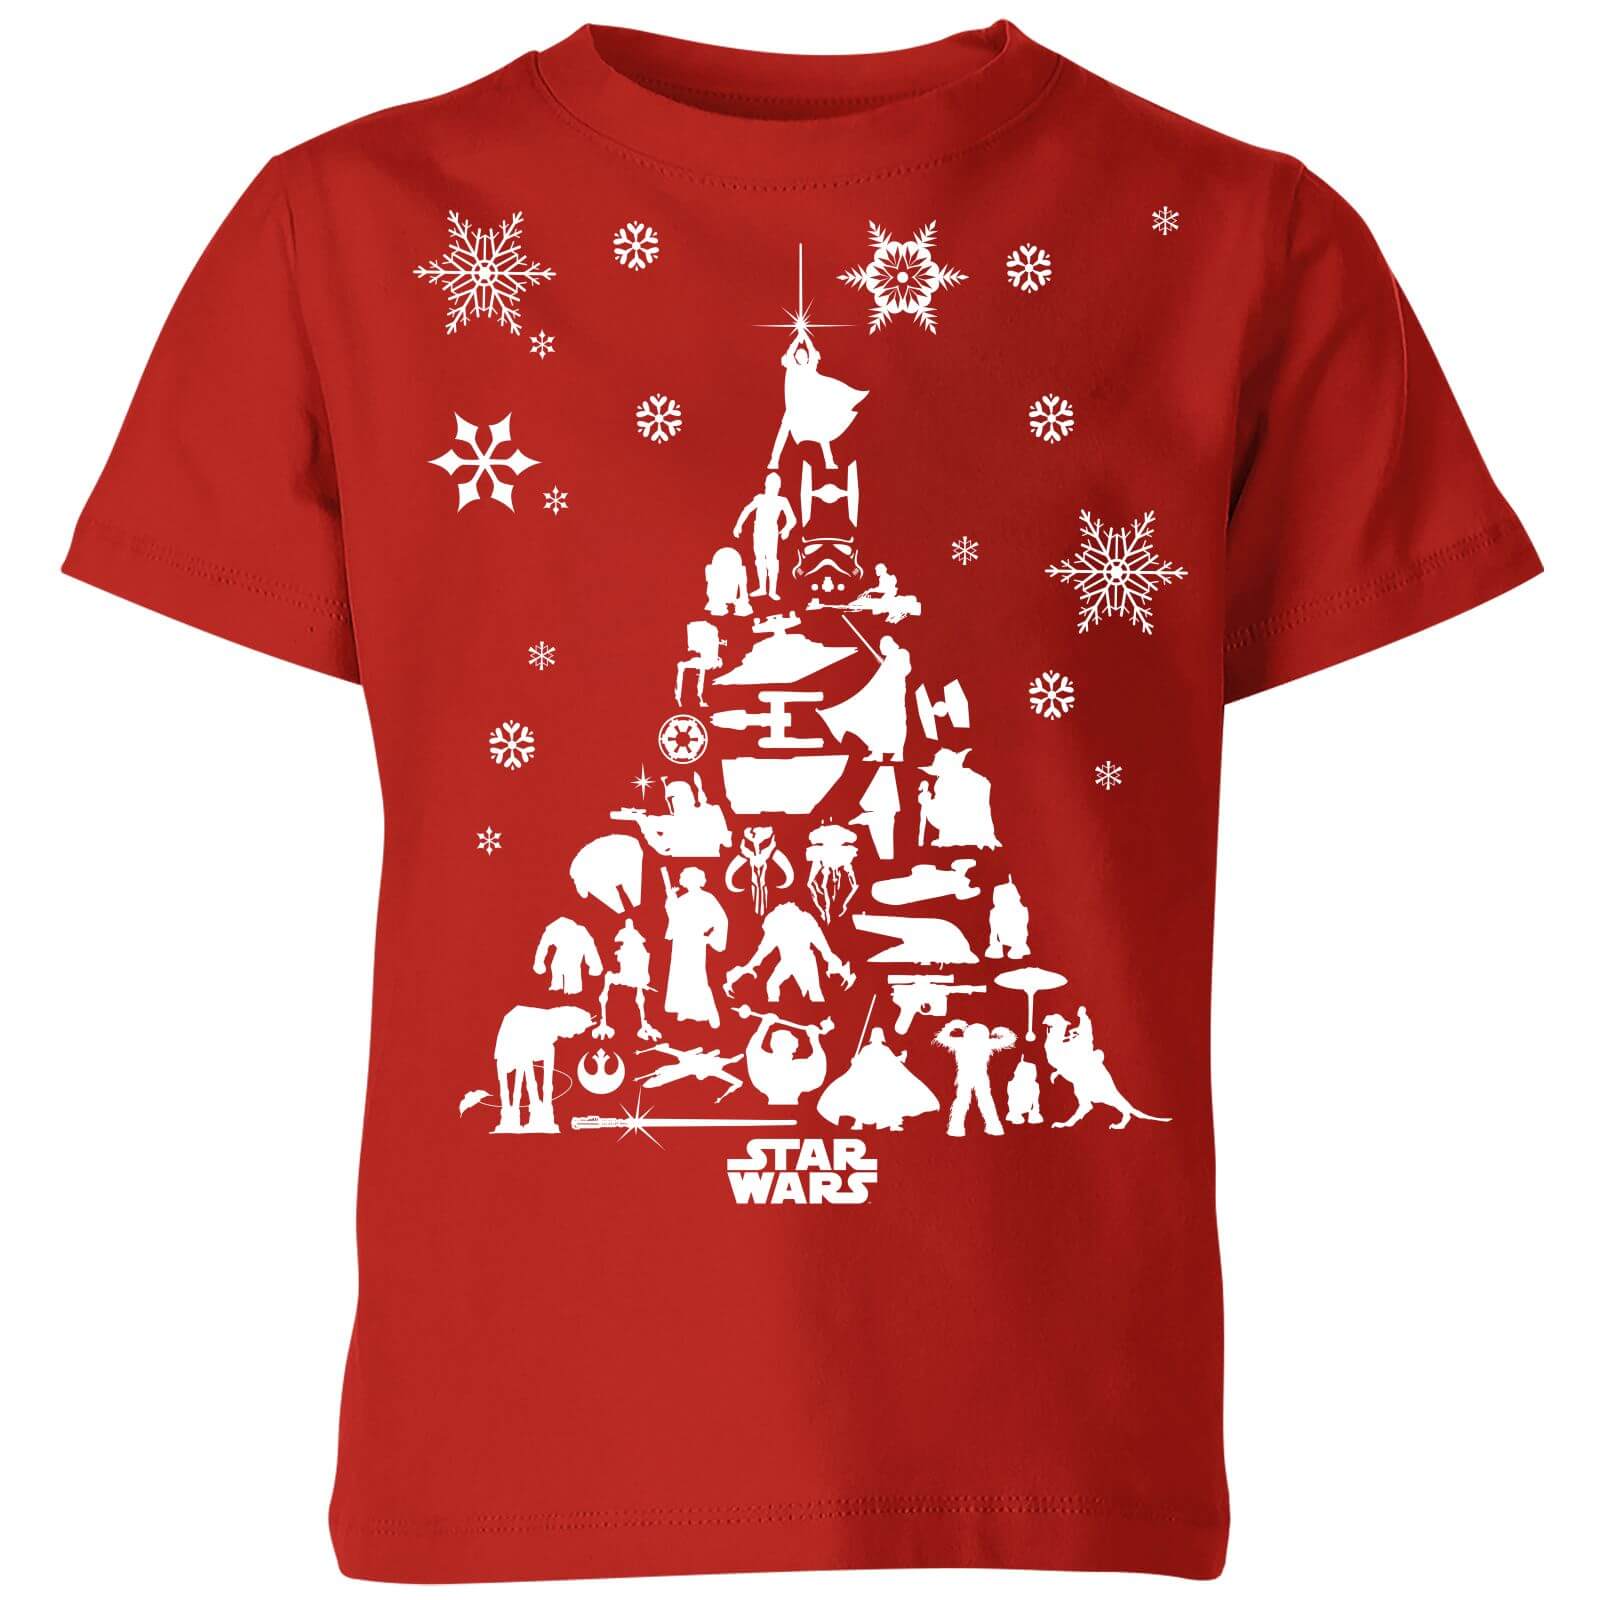 Star Wars Character Christmas Tree Kids' Christmas T-Shirt - Red - 5-6 Years - Red